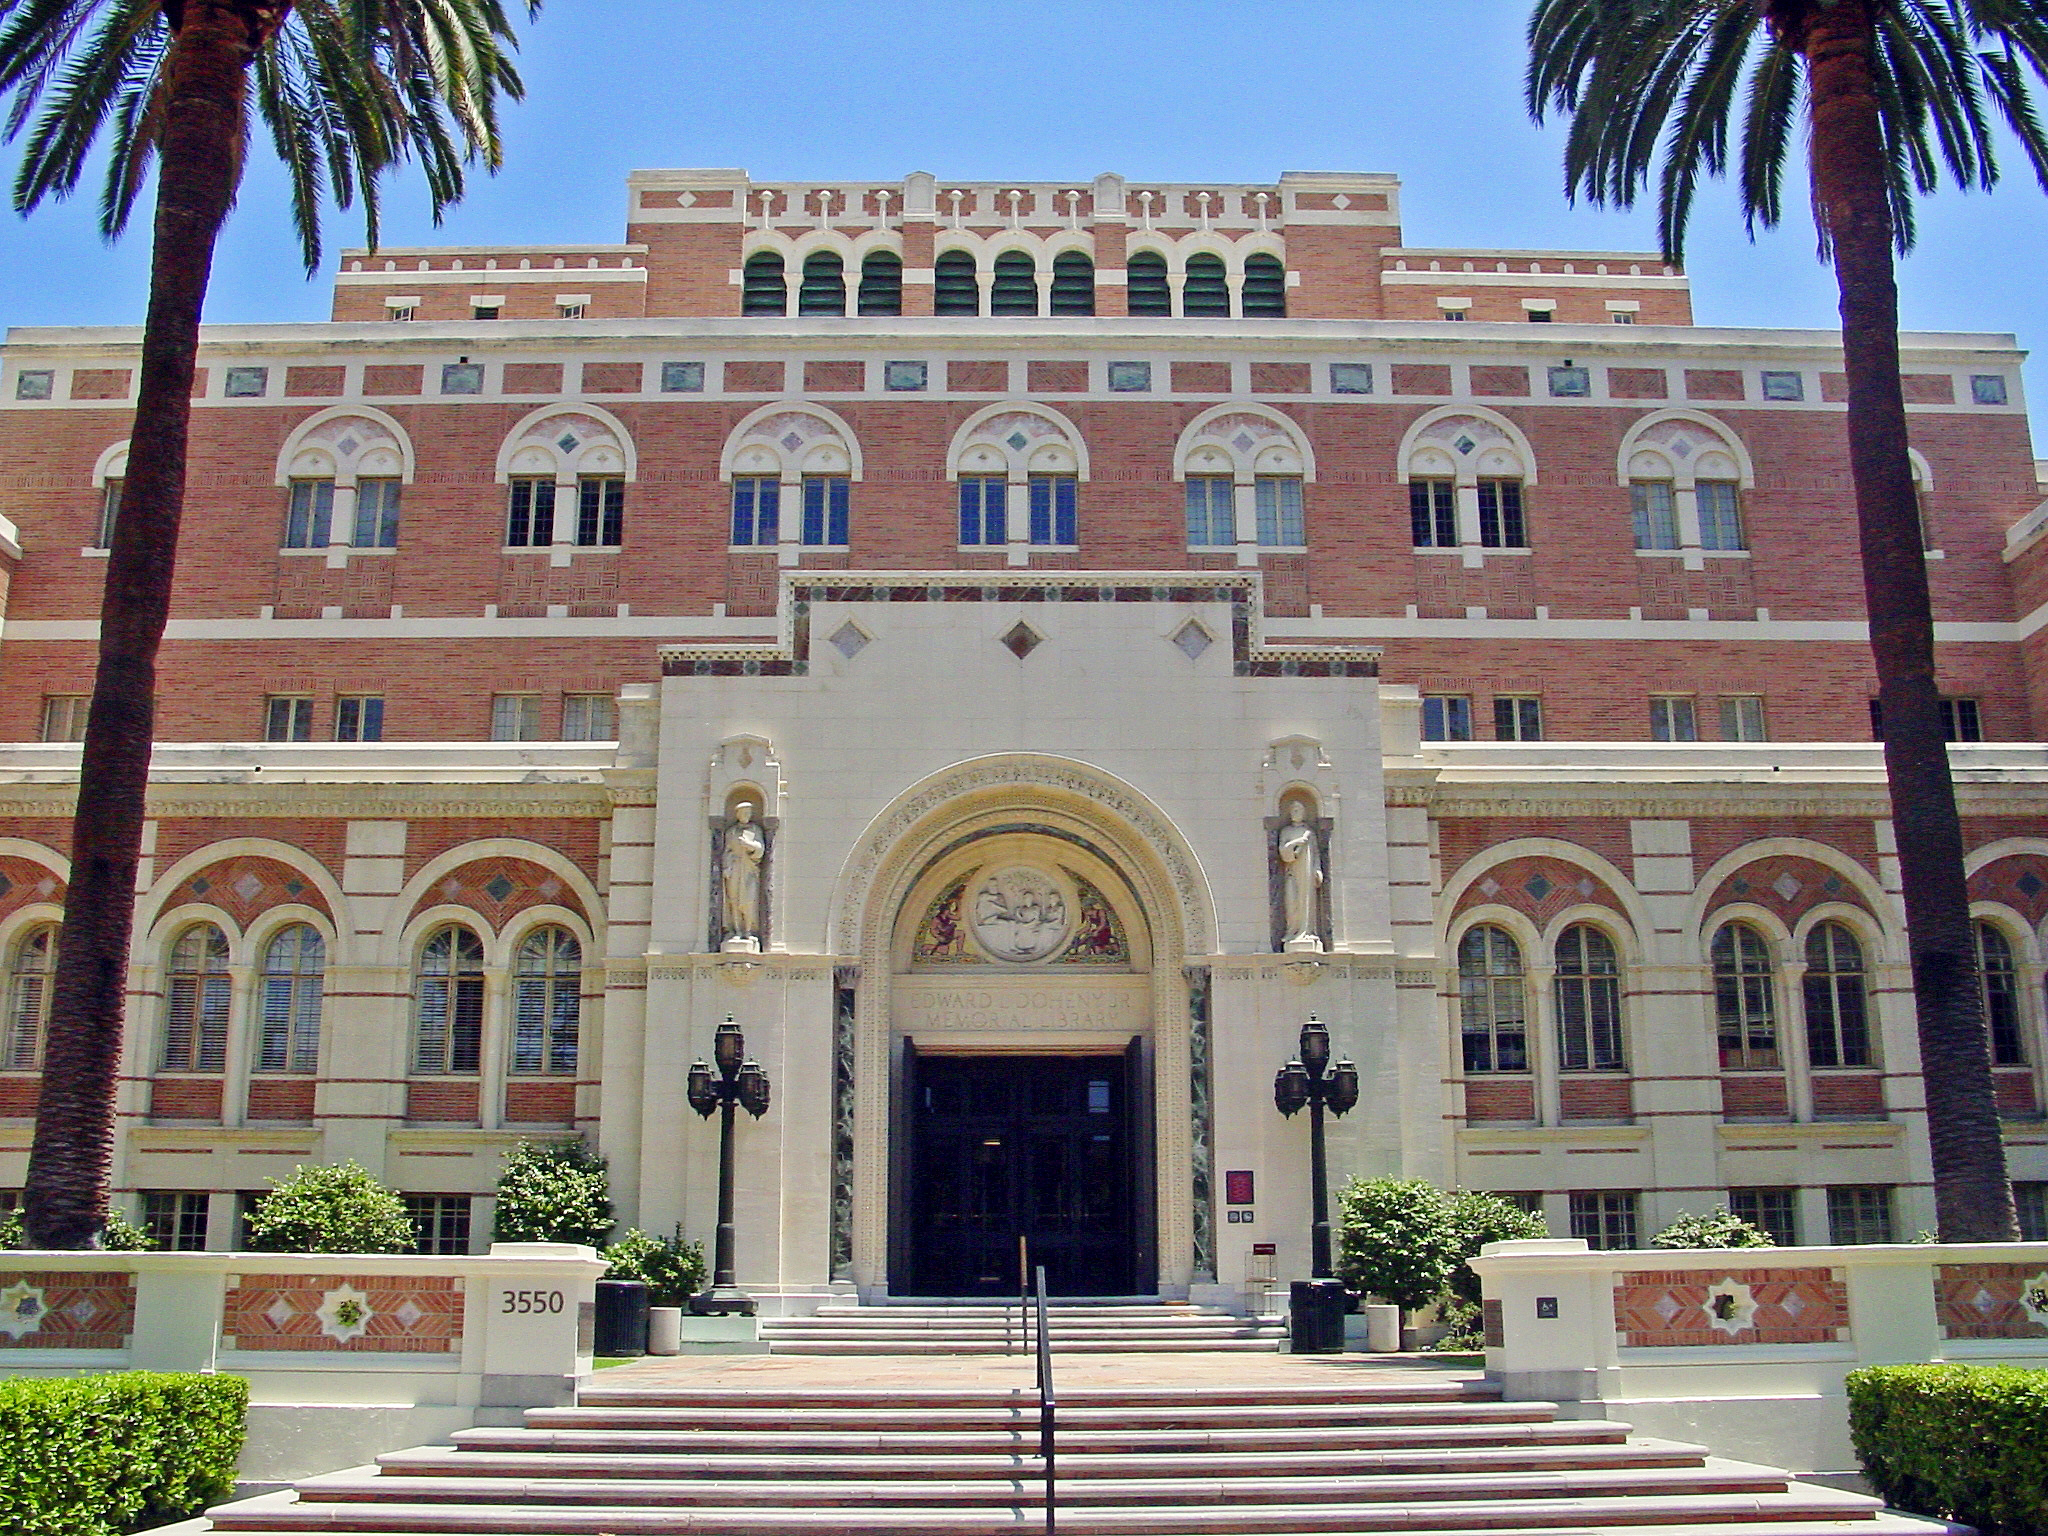 University of Southern California - Non-Modern Buildings